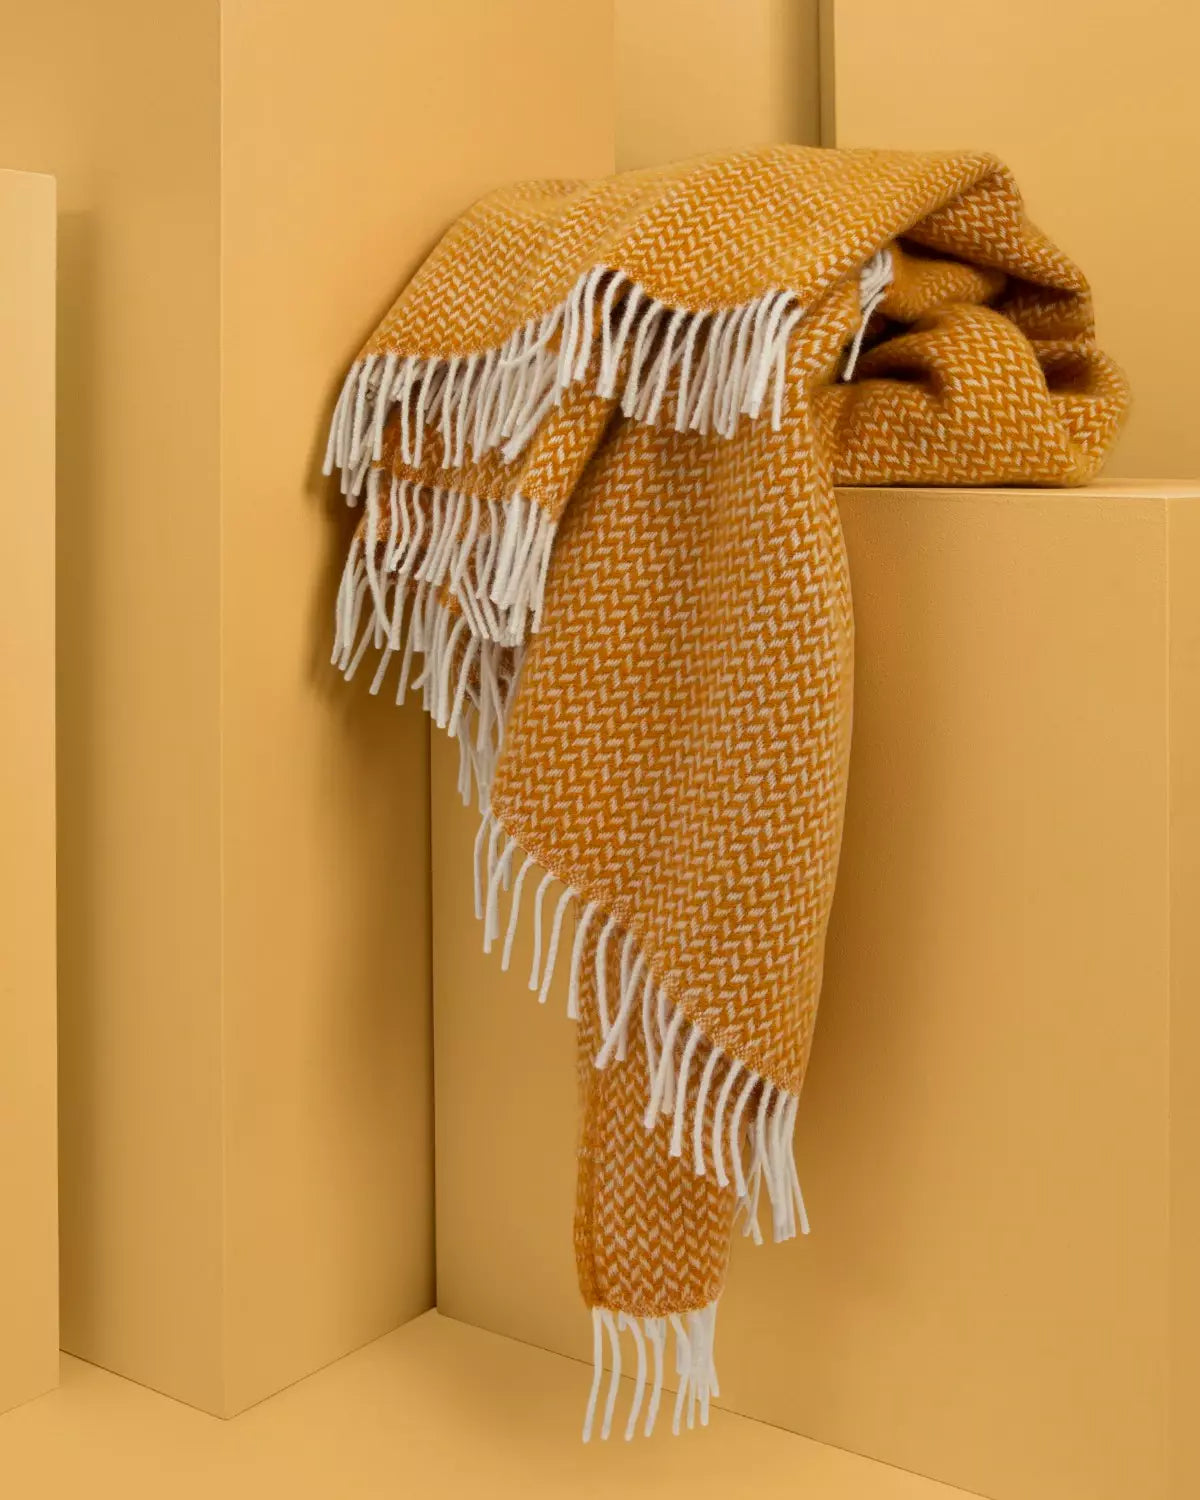 soft wool blanket. yellow. yellow wool. yellow blanket. best wool blankets online. best blankets online. 100% wool. super soft blankets. British wool blankets made from wool. 